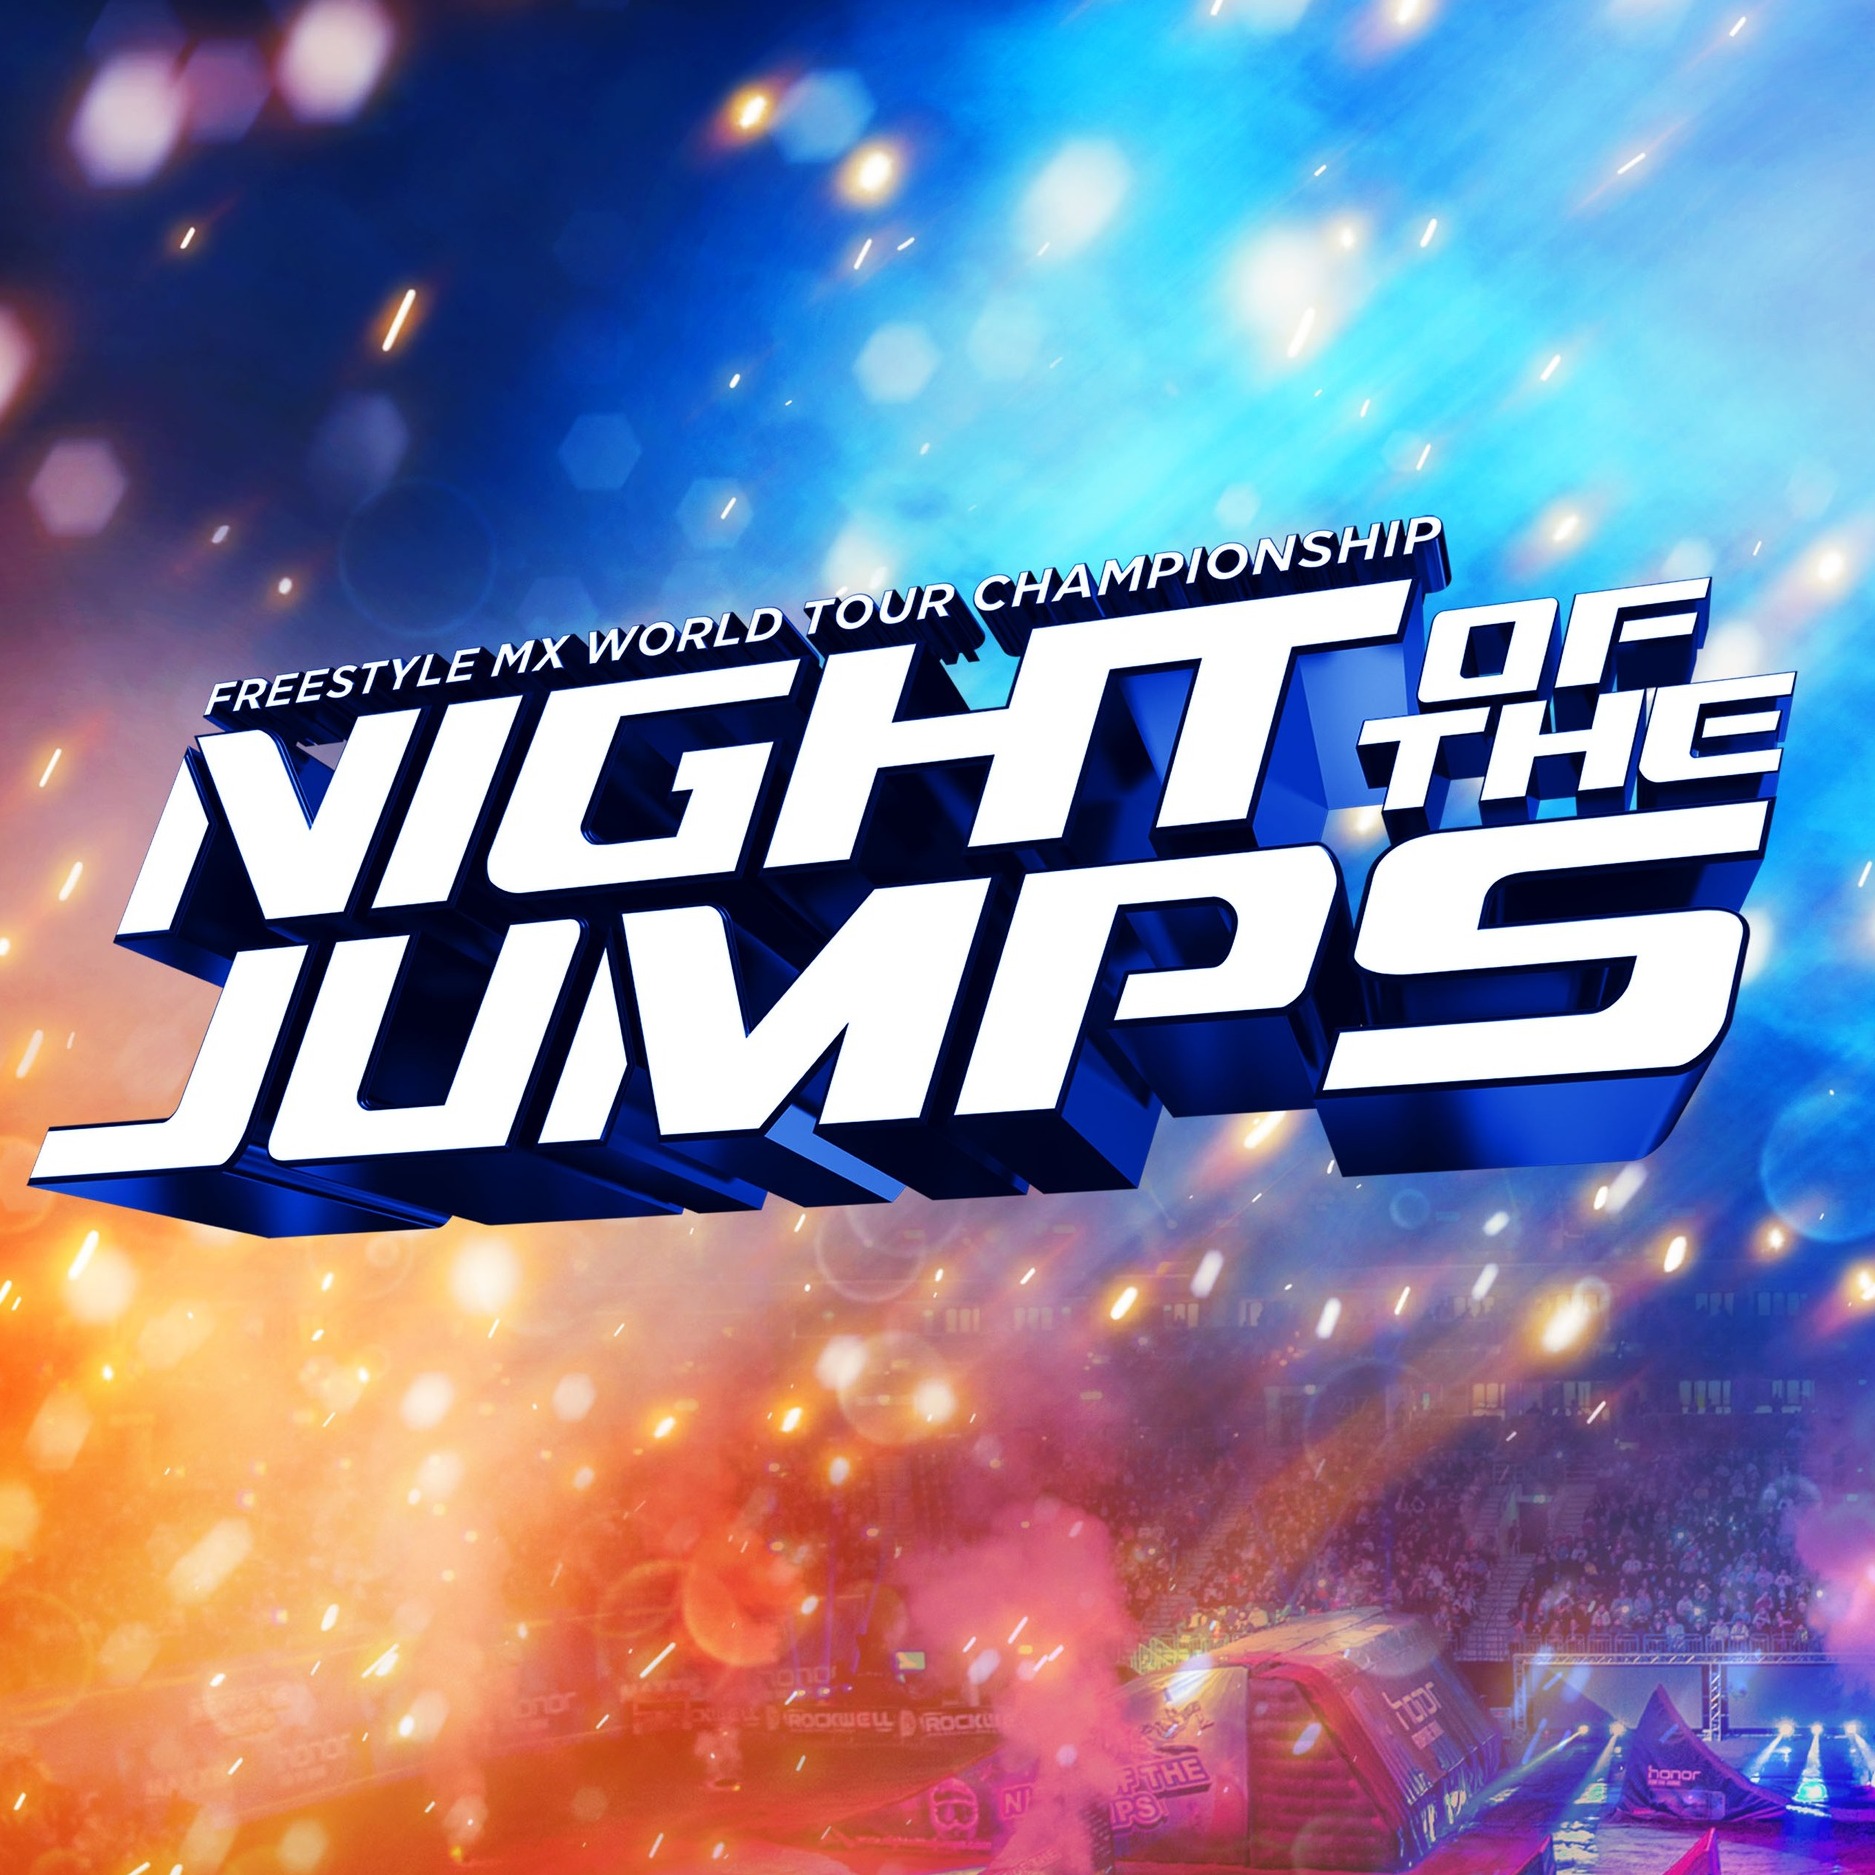 Night of the Jumps Tickets